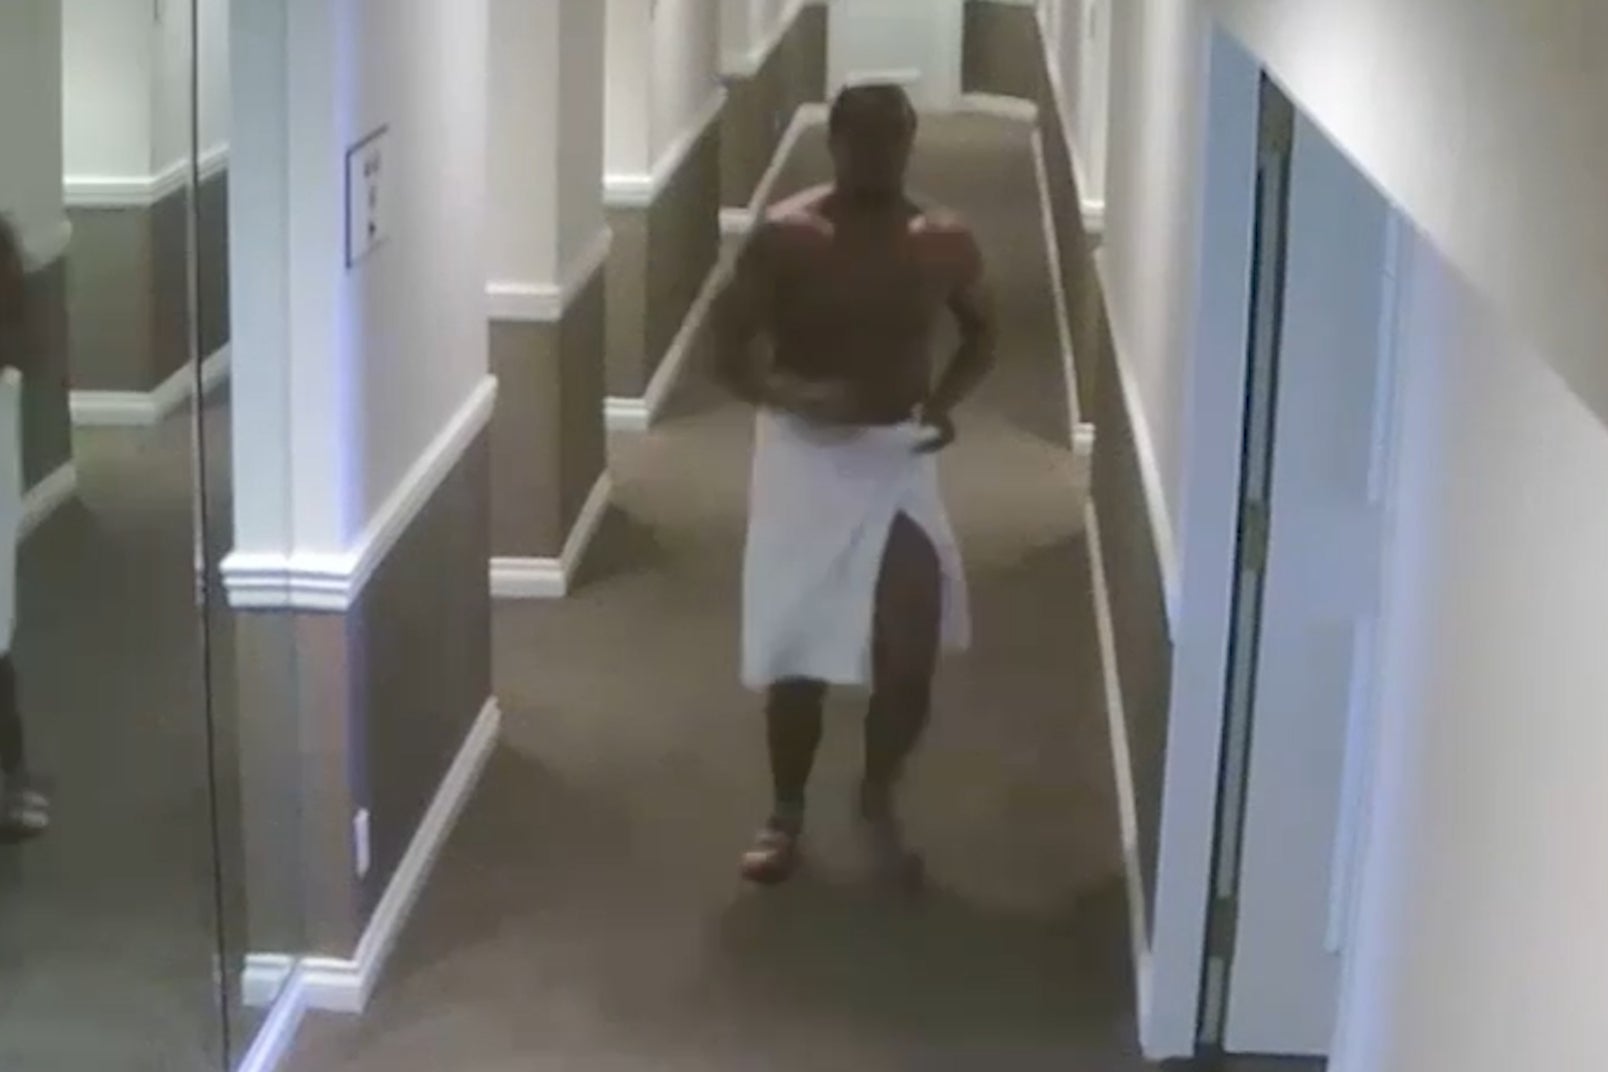 Diddy is seen in a towel chasing Cassie down the corridor towards the elevators, where he attacks her and pushes her to the floor